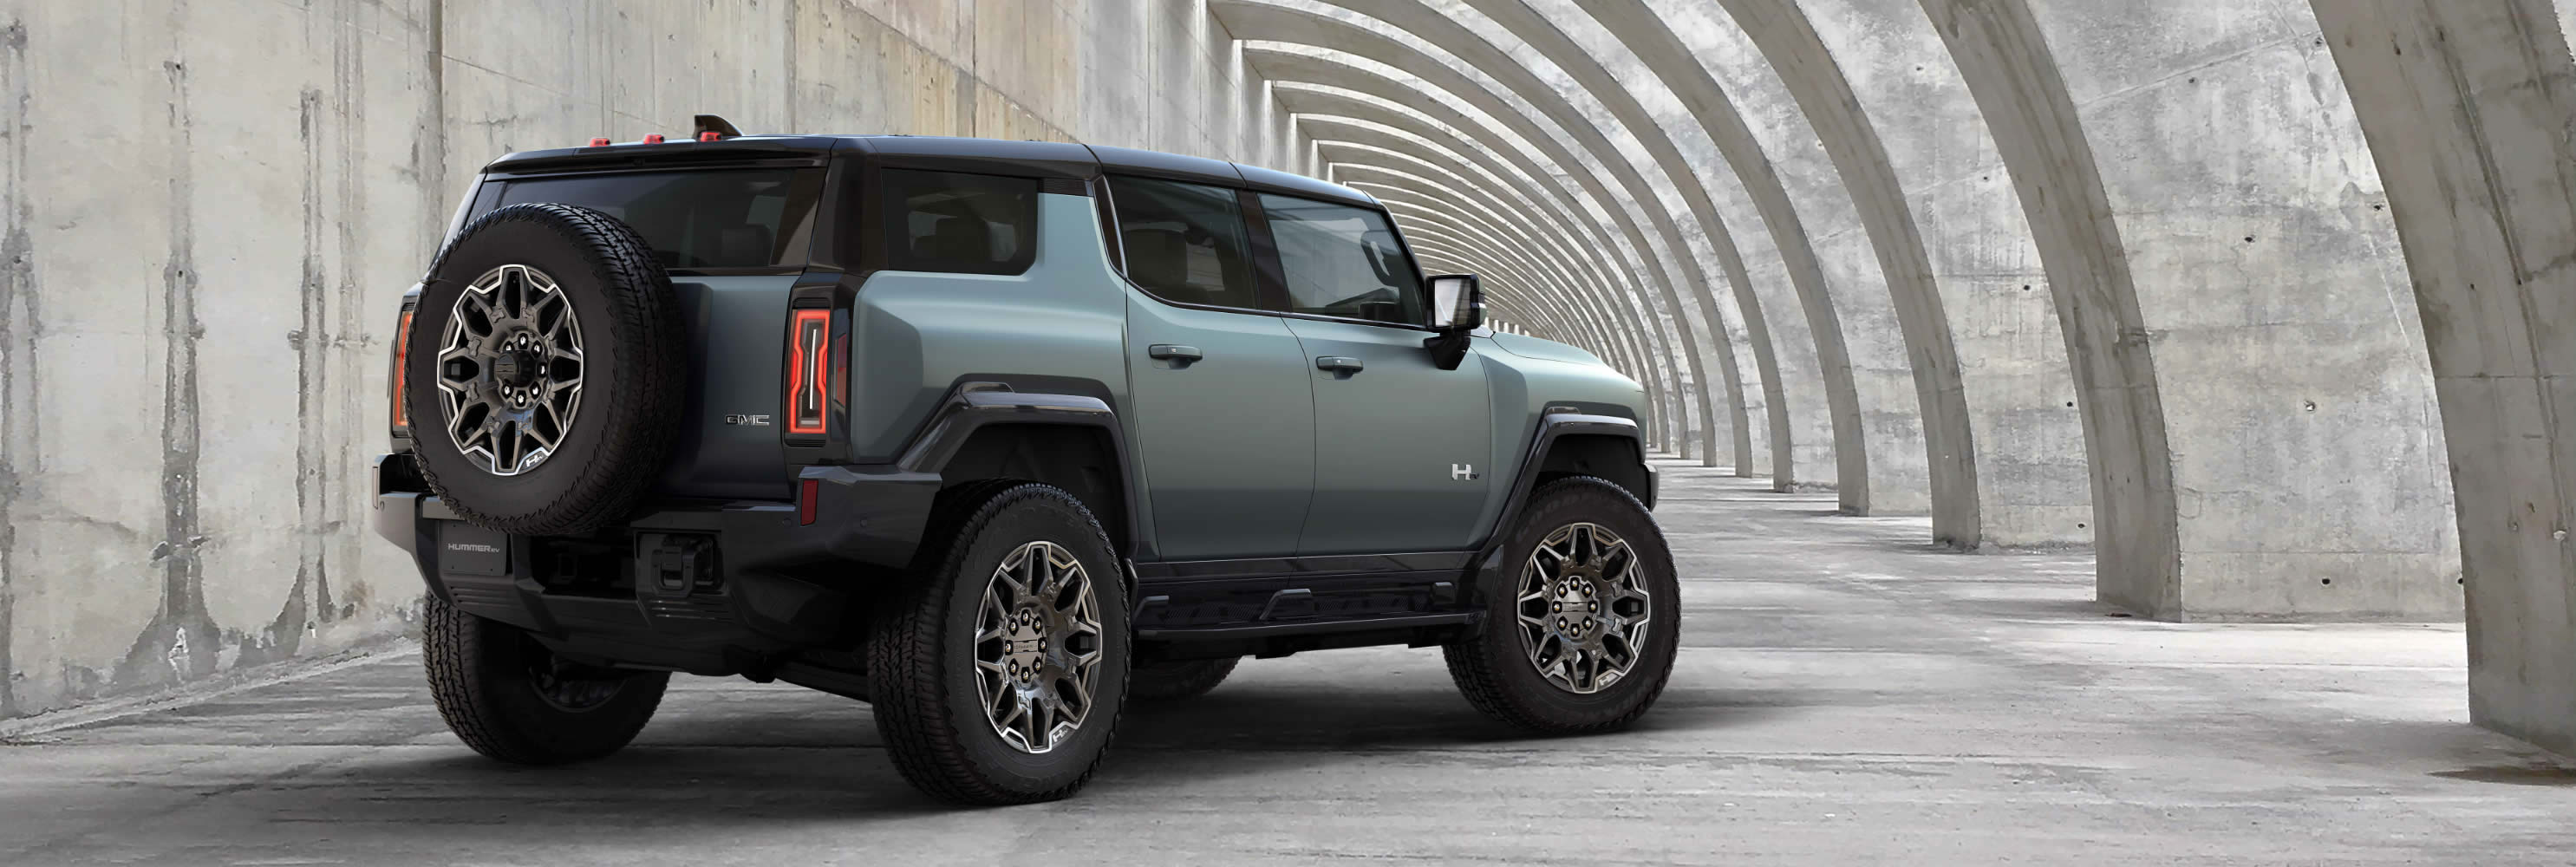 2020 GMC HUMMER EV Electric Truck Side Angle Exterior View